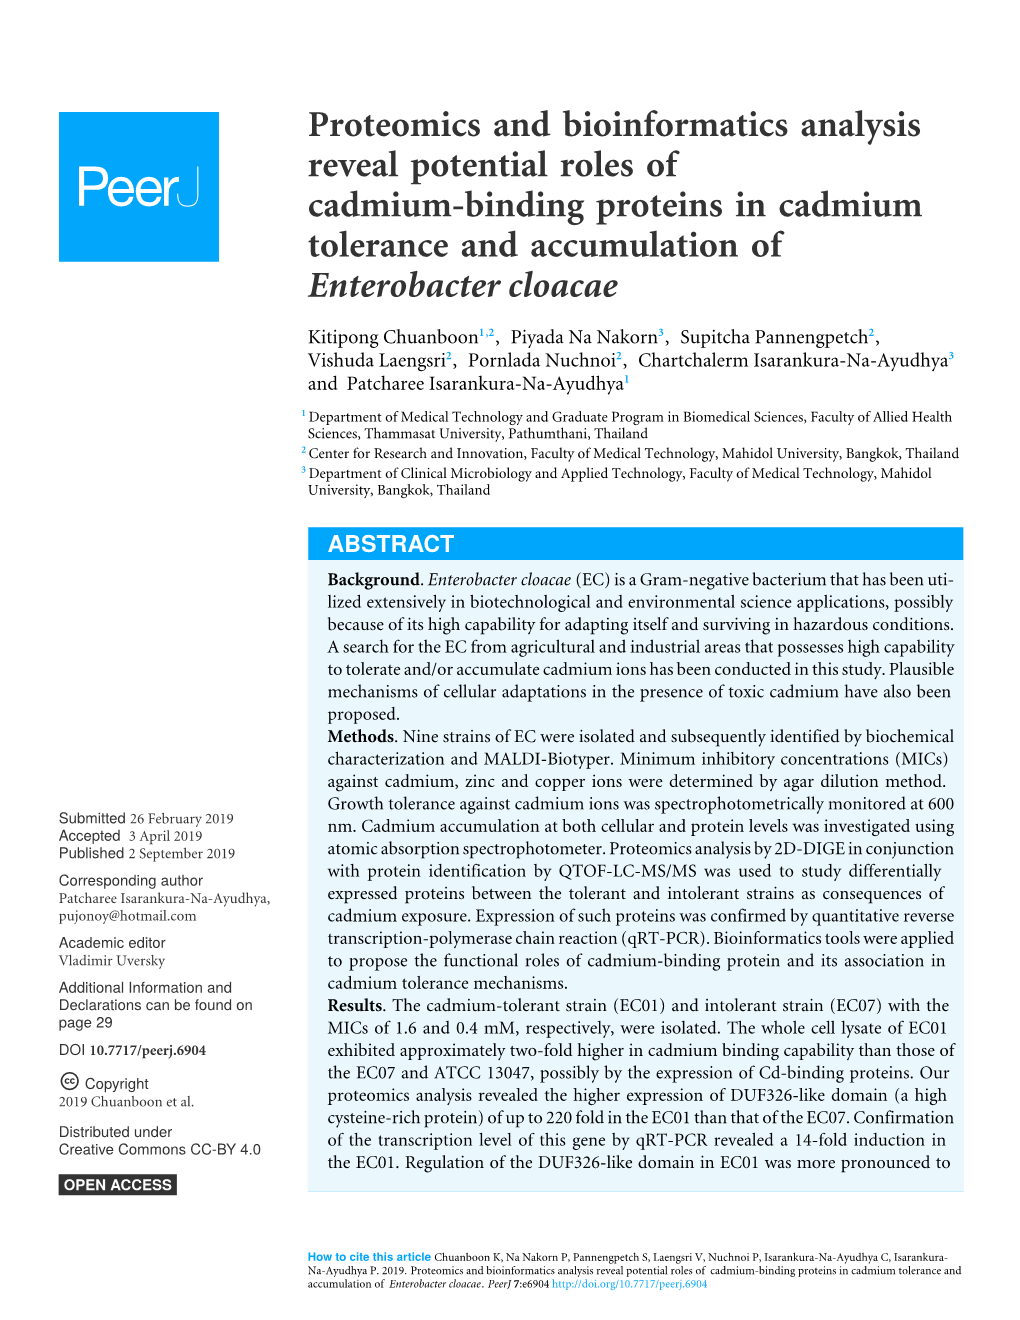 Proteomics and Bioinformatics Analysis Reveal Potential Roles of Cadmium-Binding Proteins in Cadmium Tolerance and Accumulation of Enterobacter Cloacae